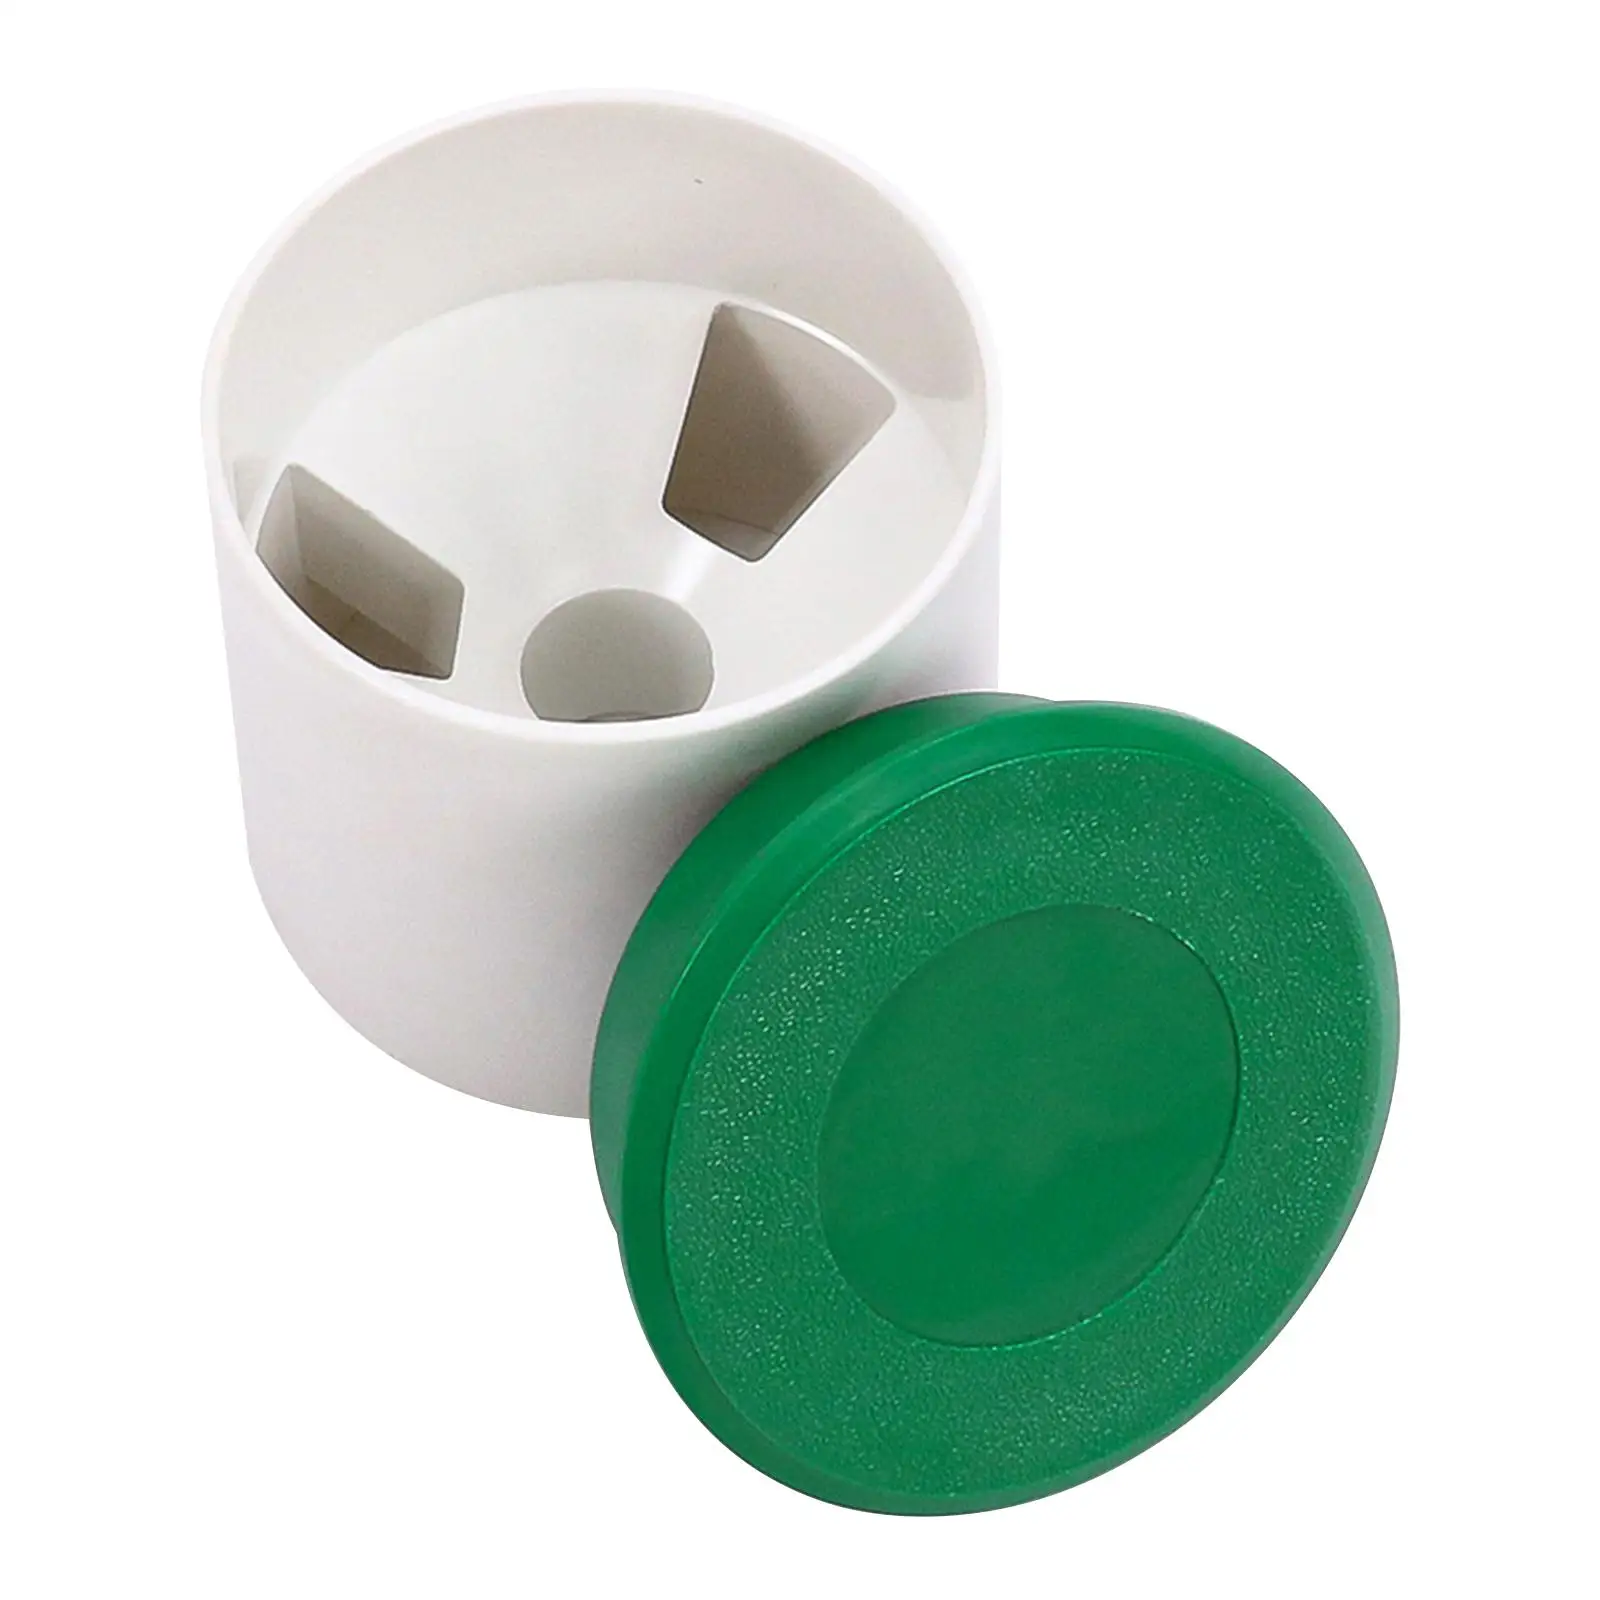 Golf Cup with Cover Protective Cap Protector for Putt Practice Tools Accessories